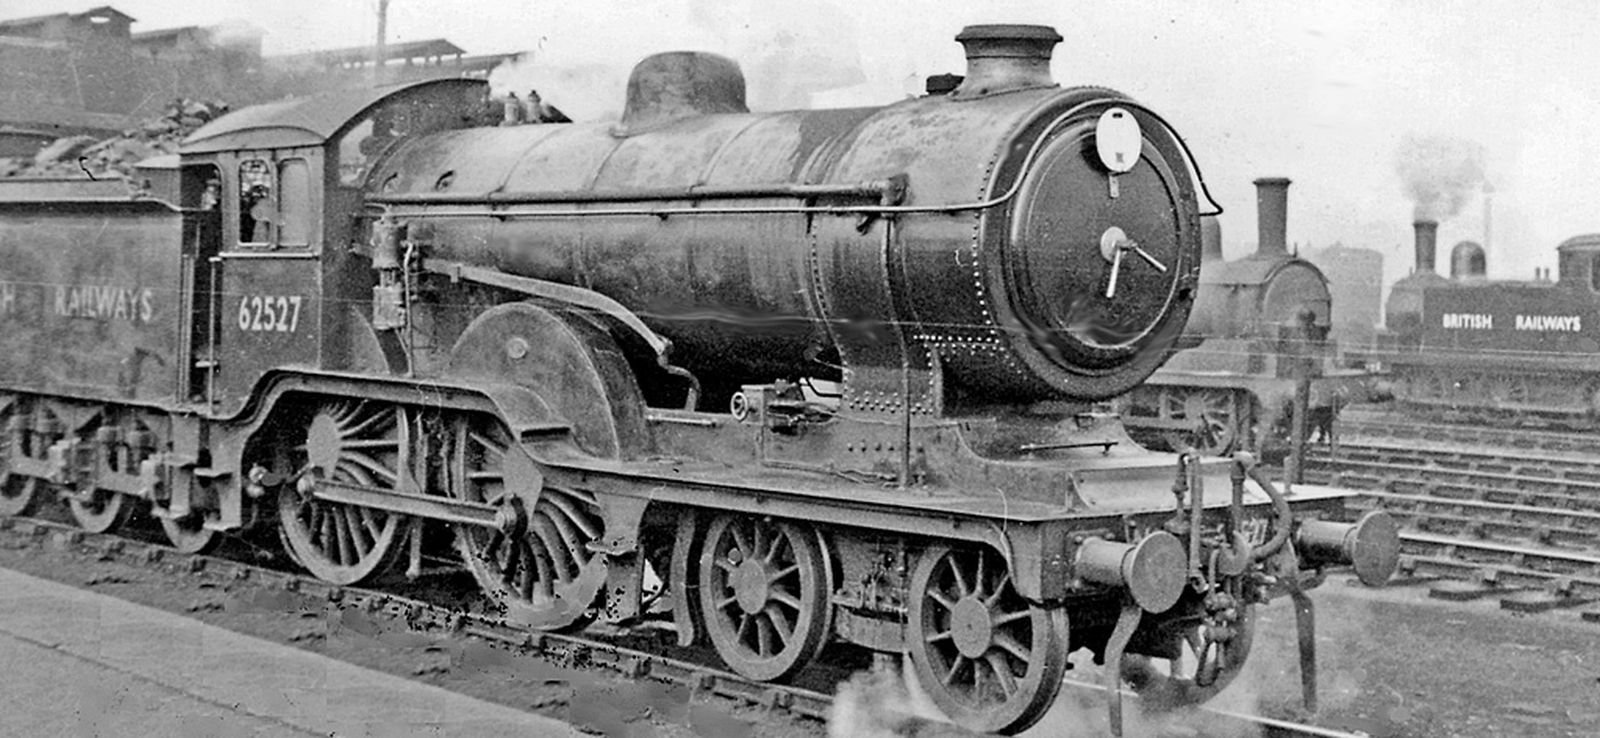 H88 or LNER D16/3 No. 62527 in BR livery in August 1949 at Cambridge depot